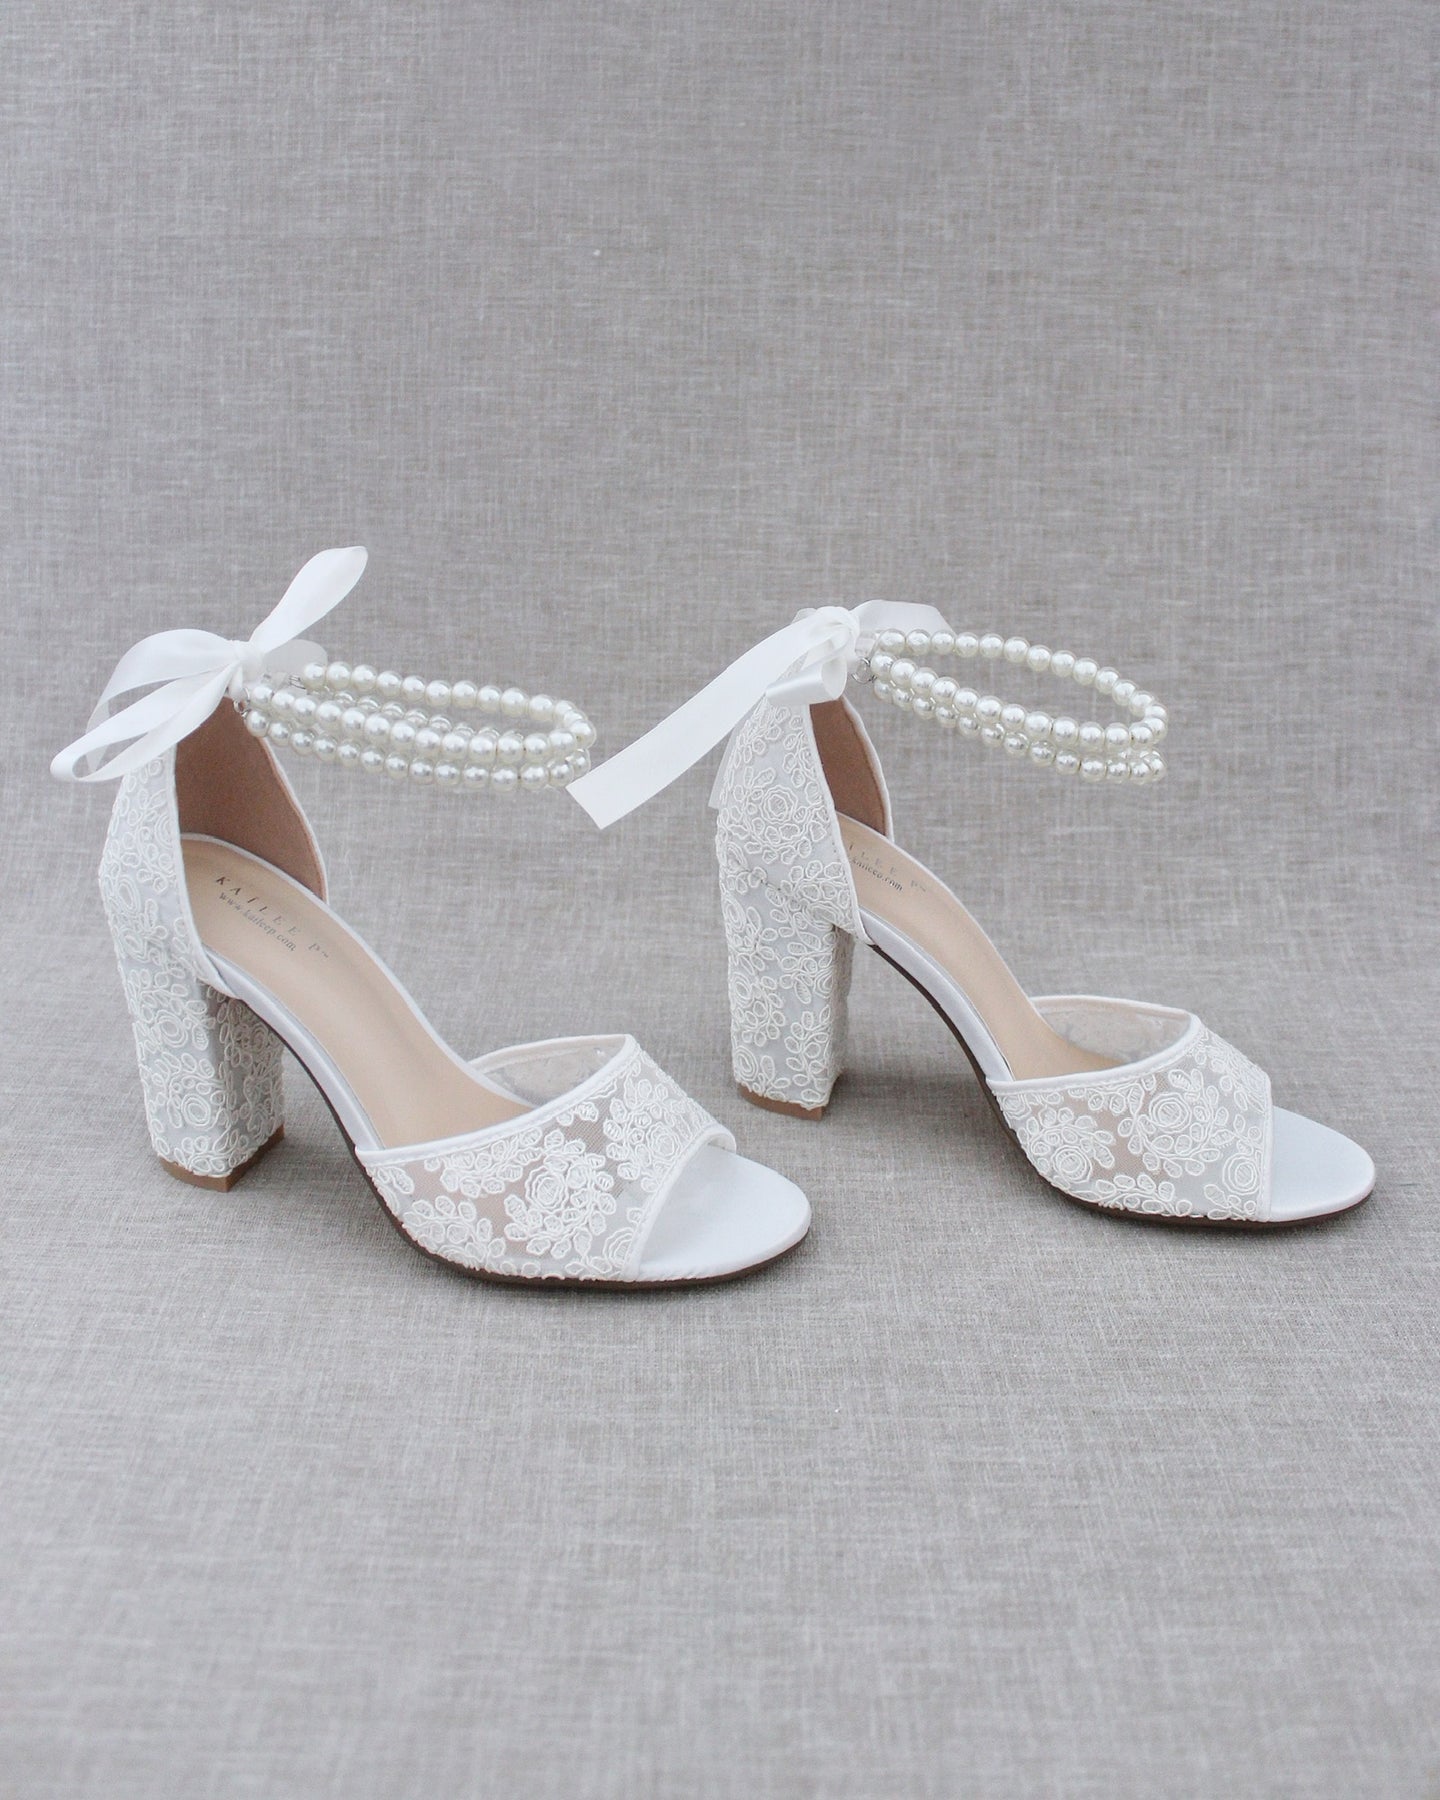 Crochet Lace Block Heel Sandals with Double Pearls Ankle Strap - Women ...